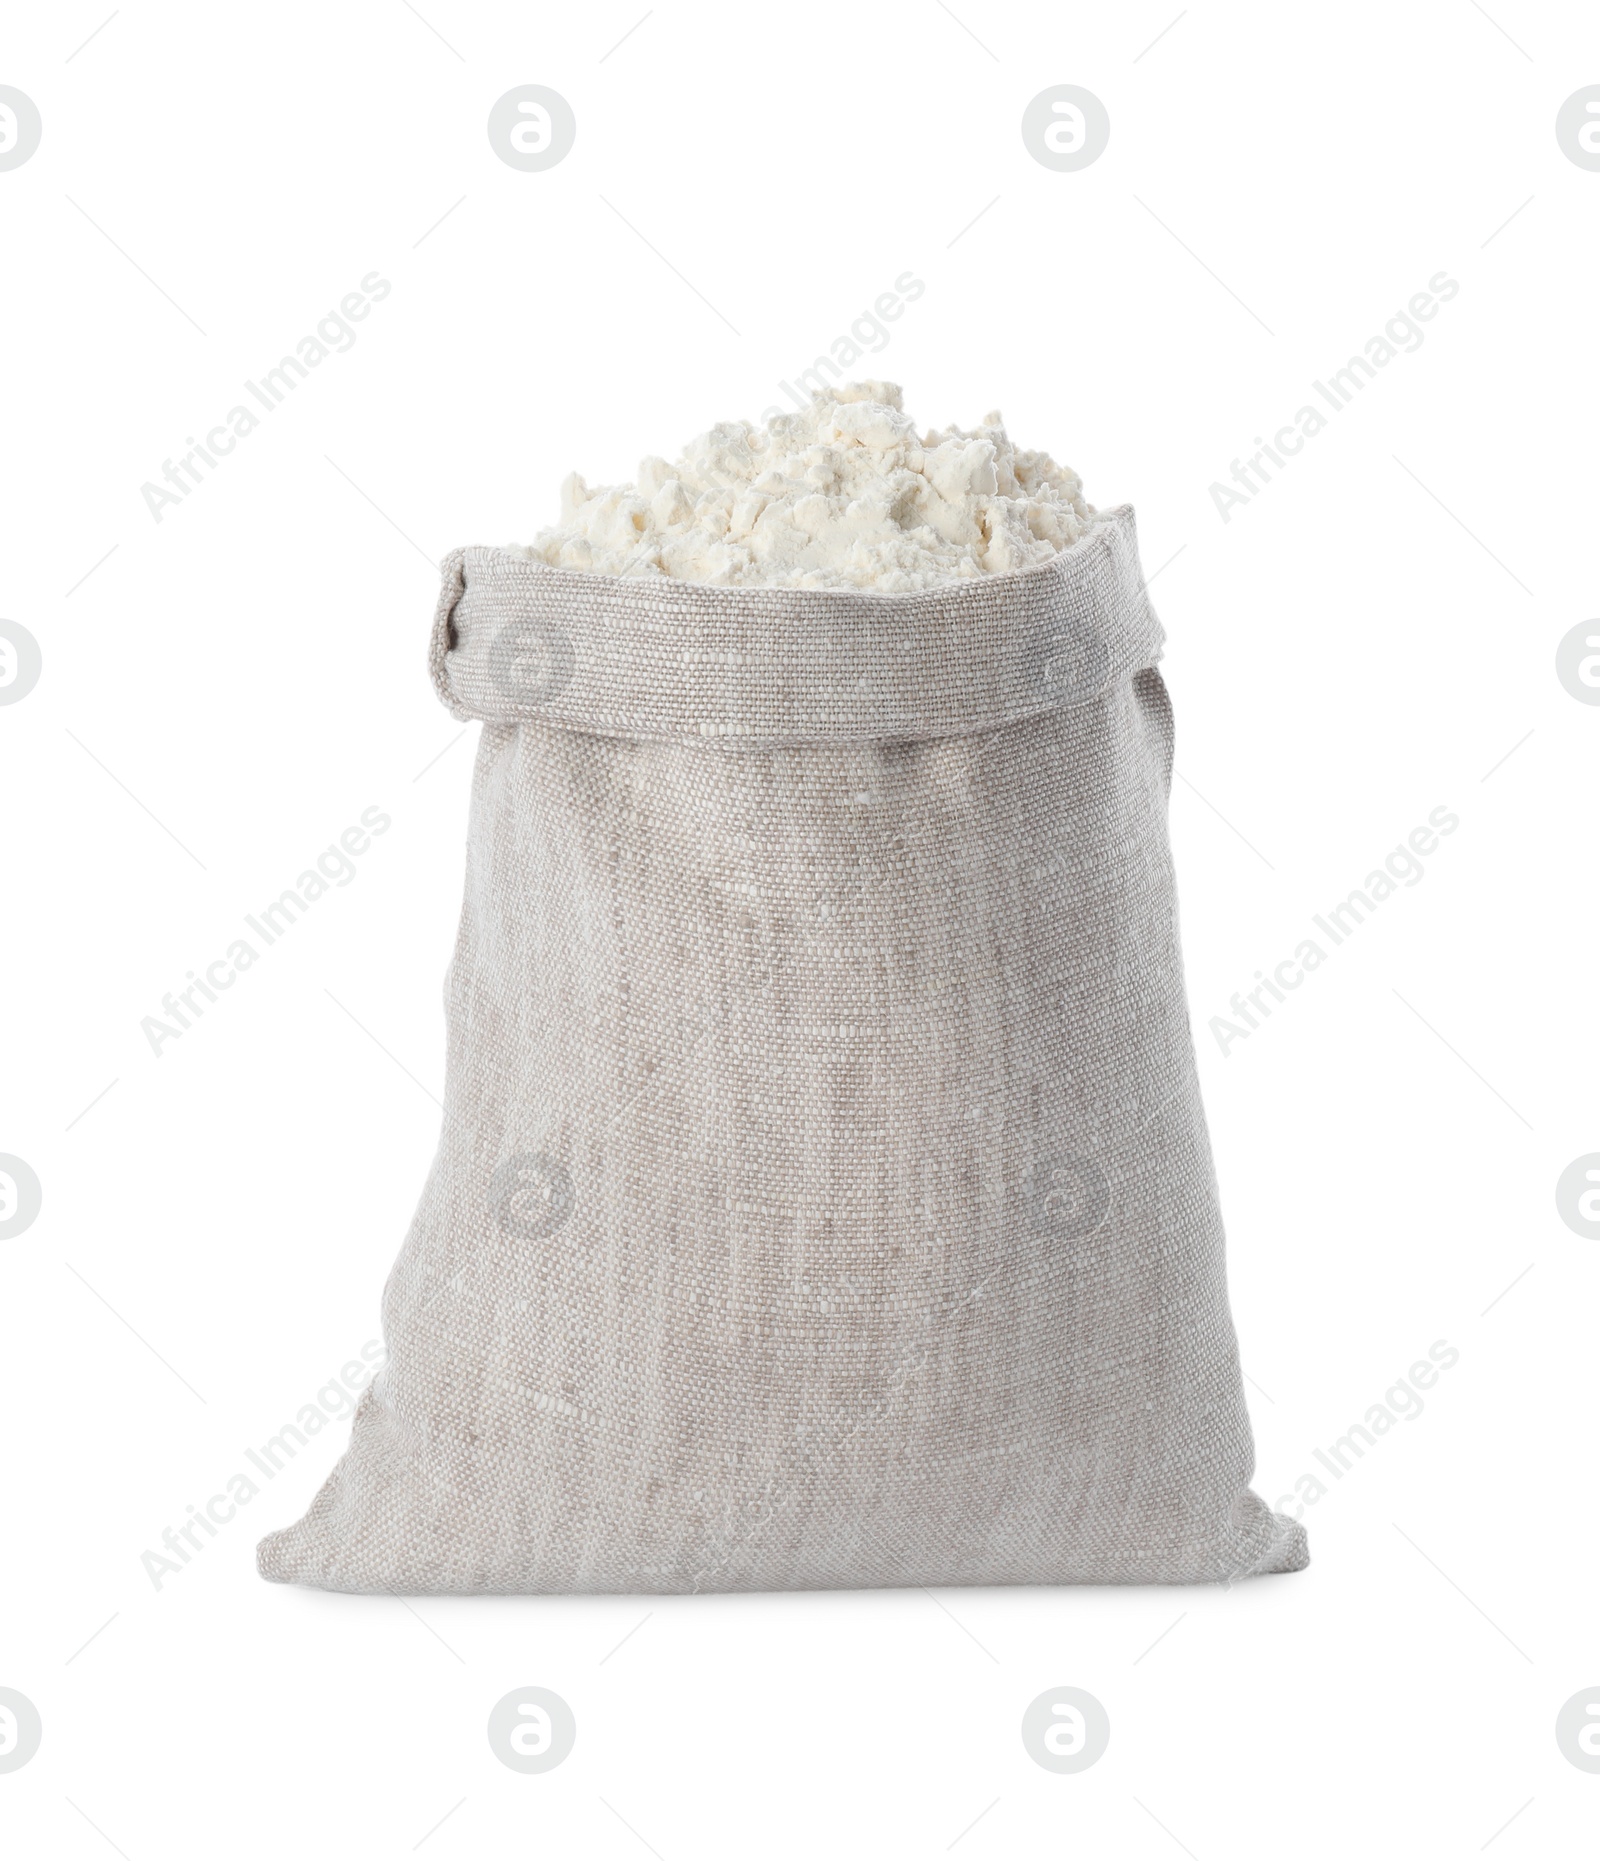 Photo of Sack with organic flour isolated on white